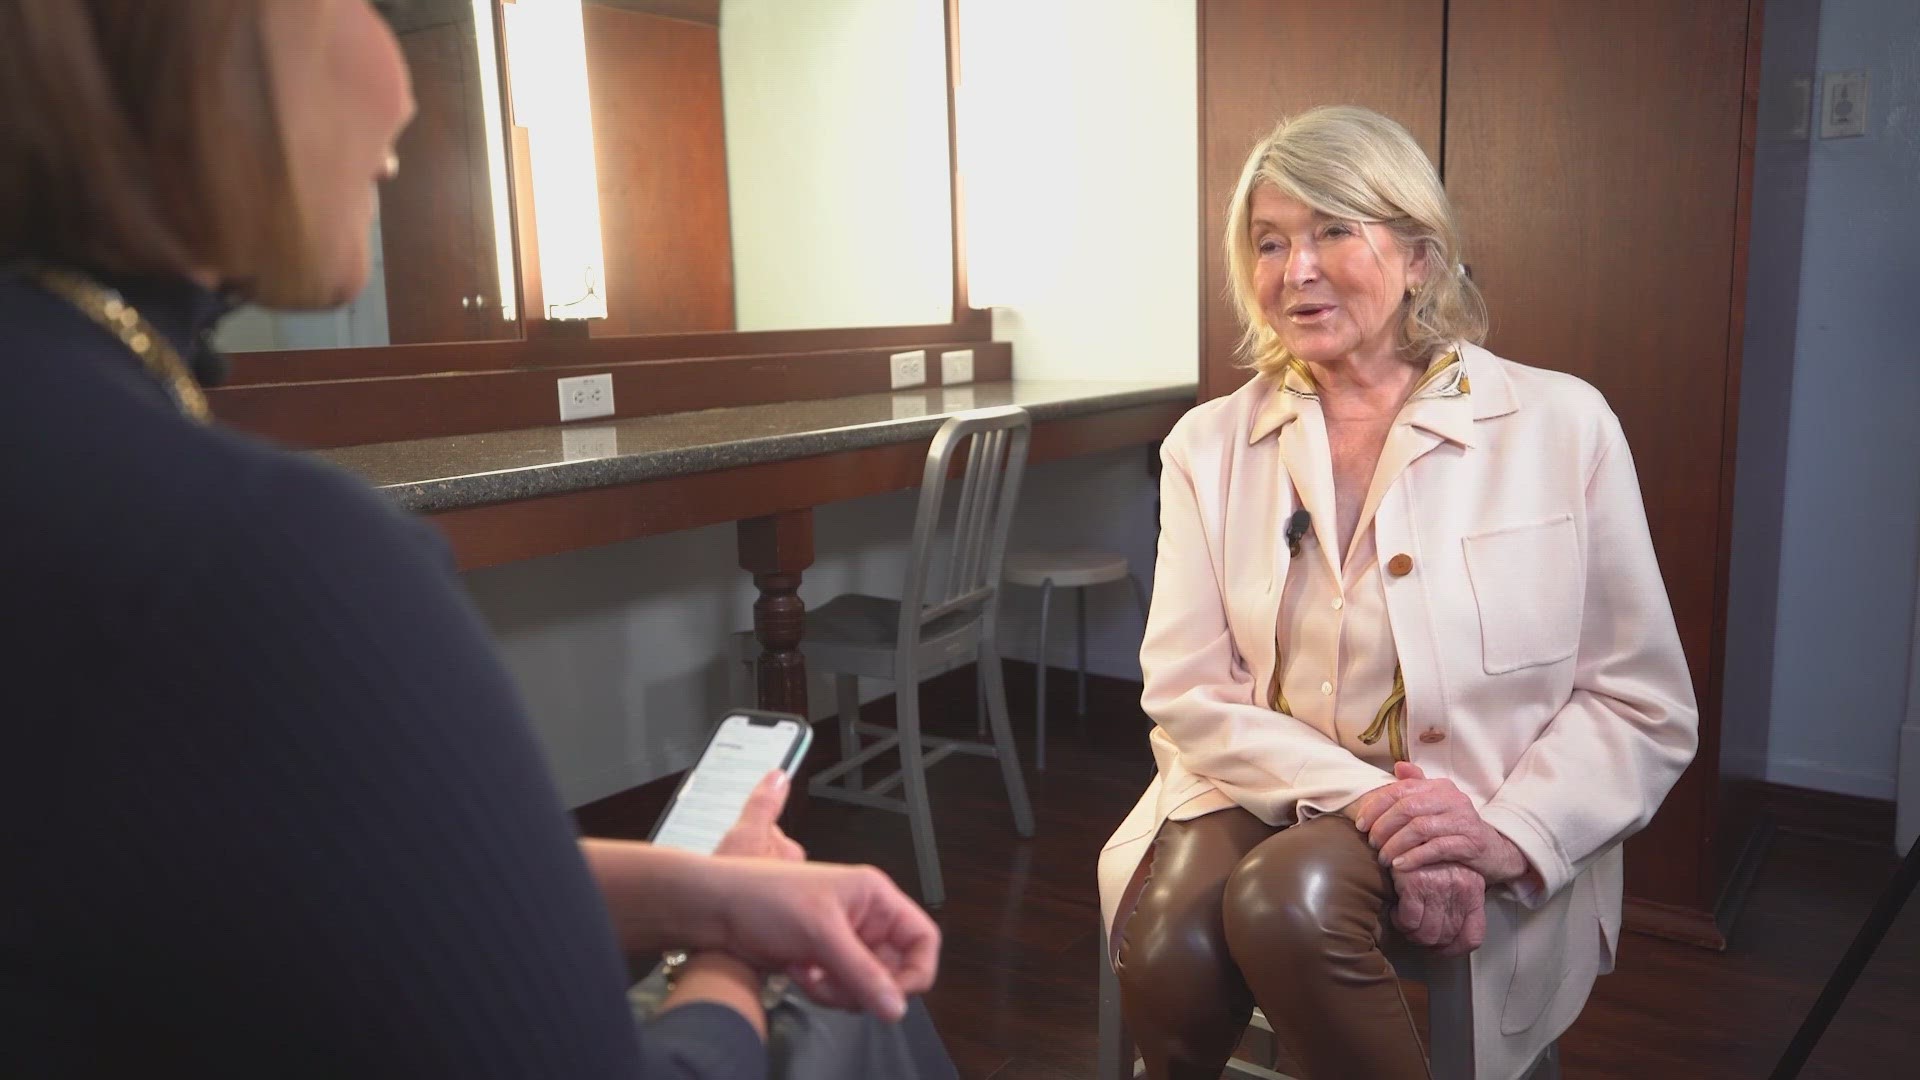 WFAA Daybreak anchor Kara Sewell sits down with domestic goddess and business mogul Martha Stewart for a chat about entrepreneurialism and change.